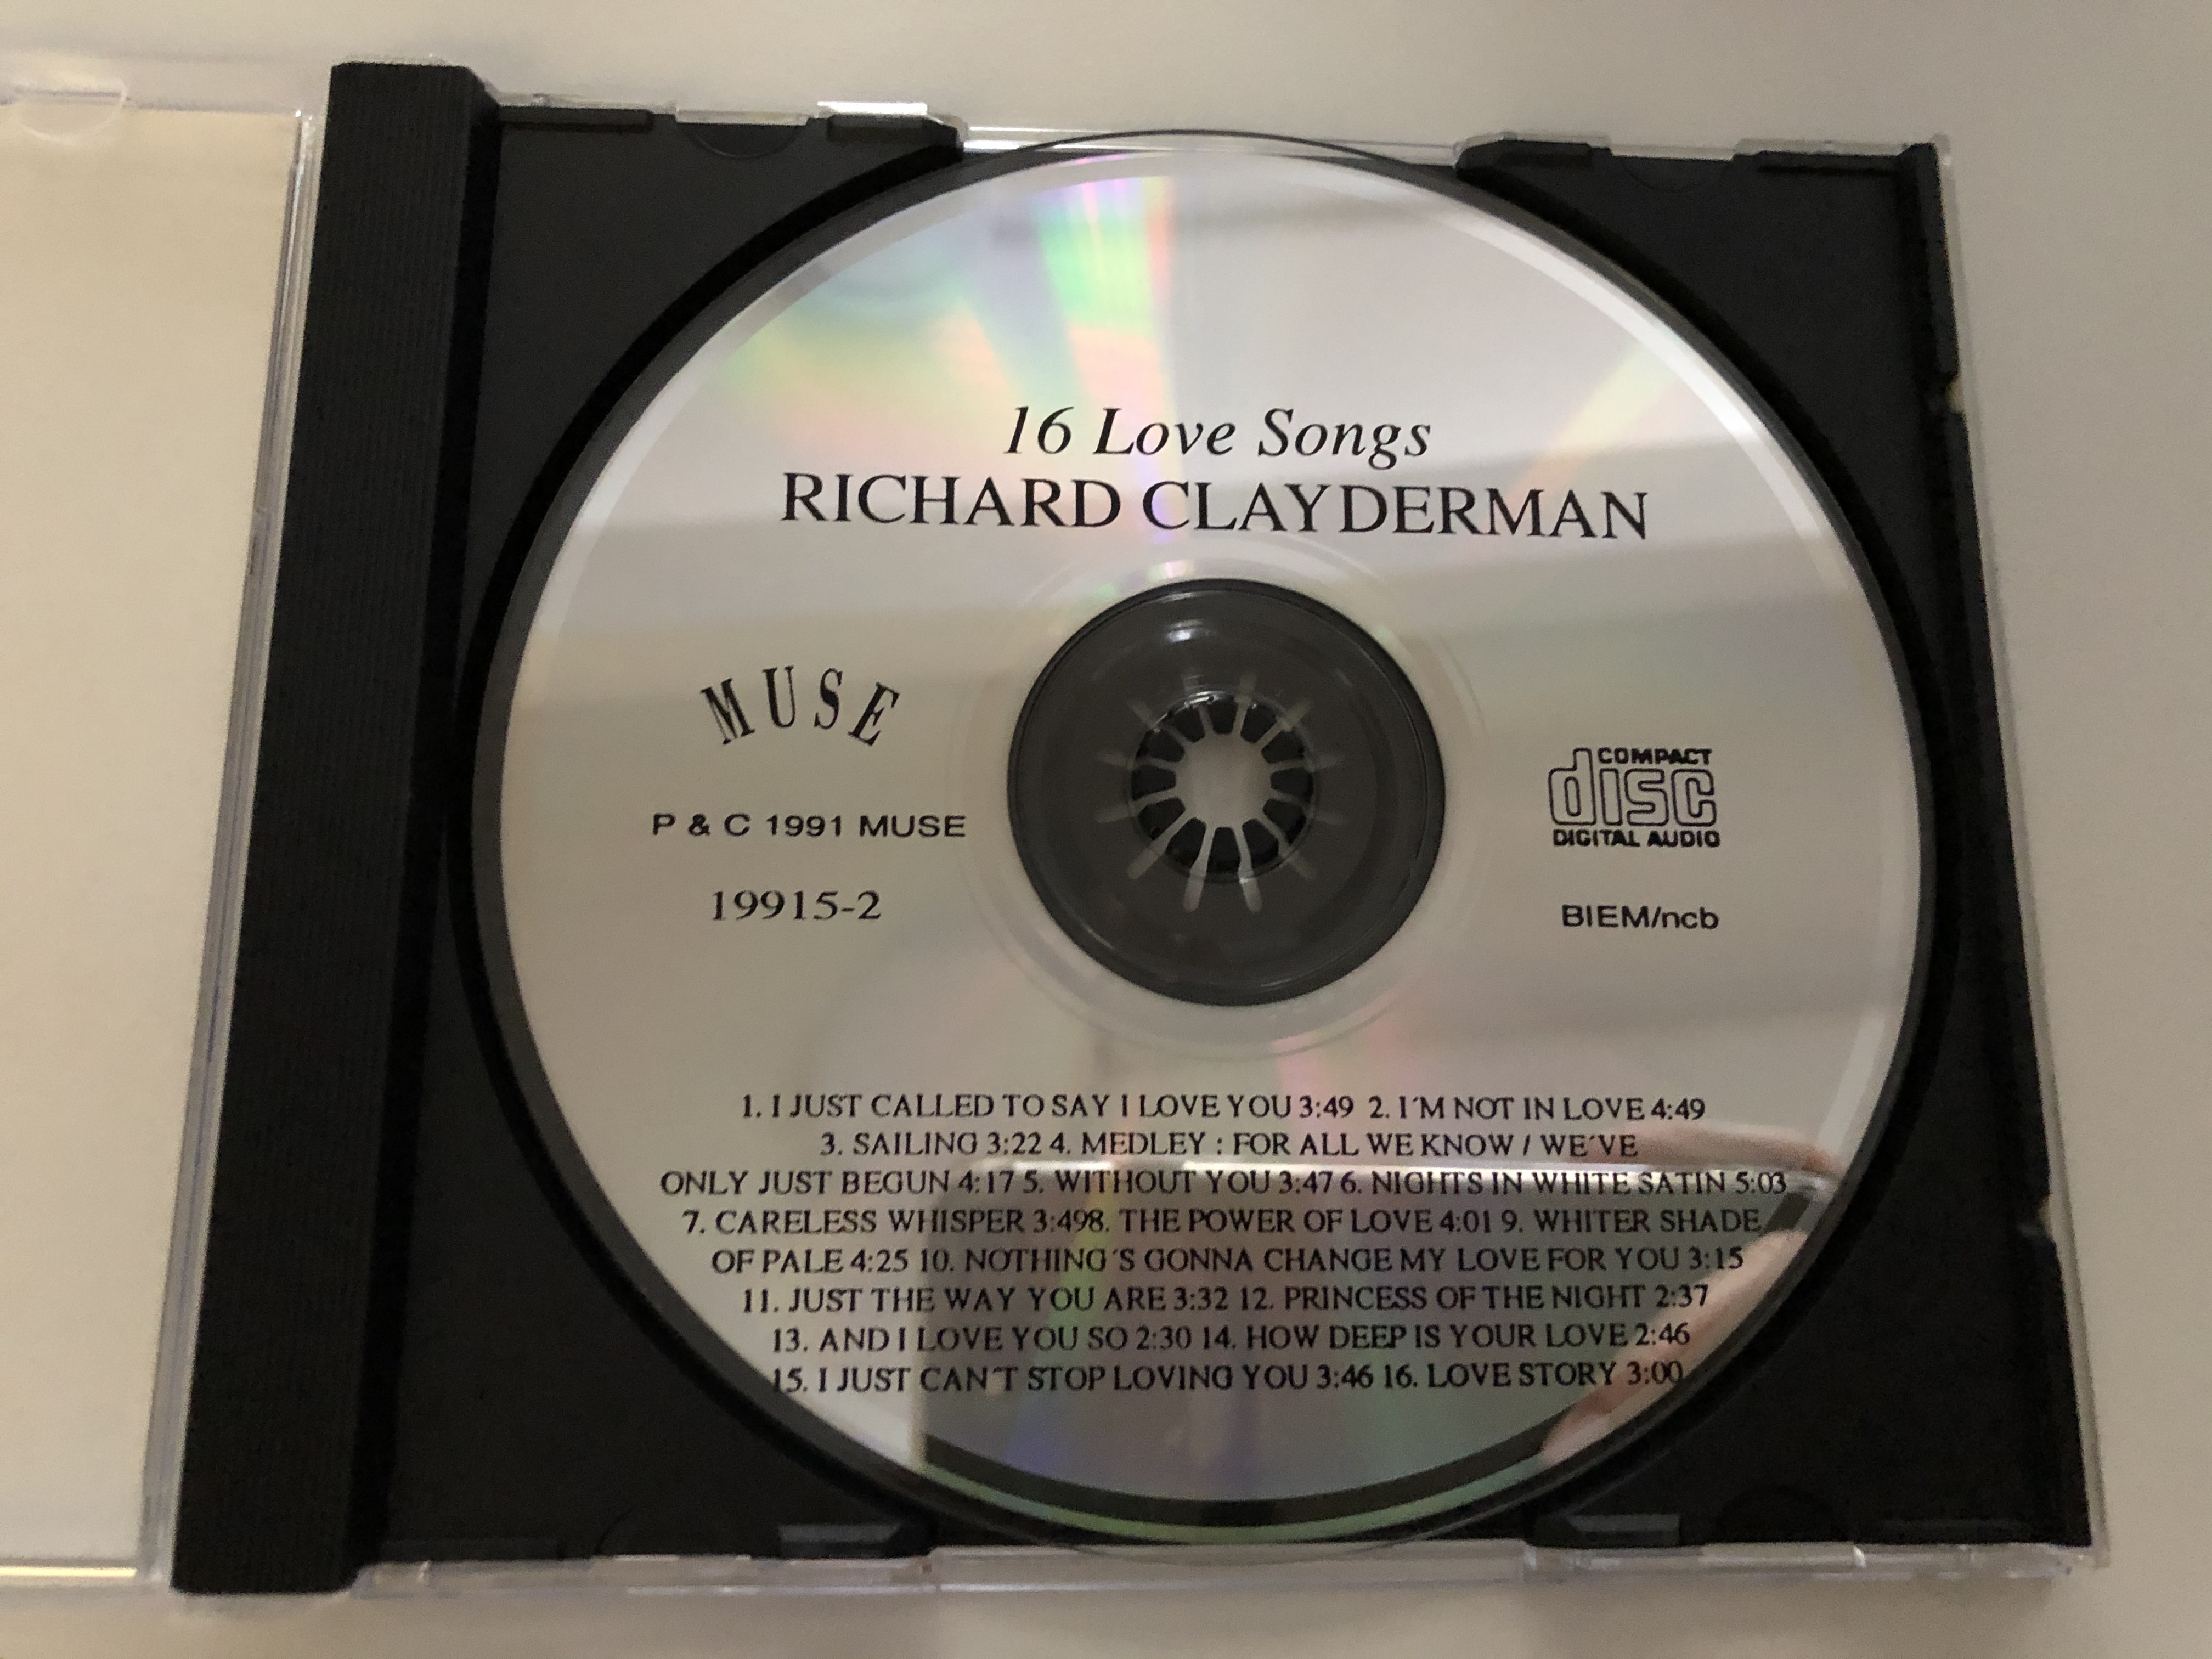 richard-clayderman-16-love-songs-gold-collection-muse-audio-cd-1991-19915-2-4-.jpg